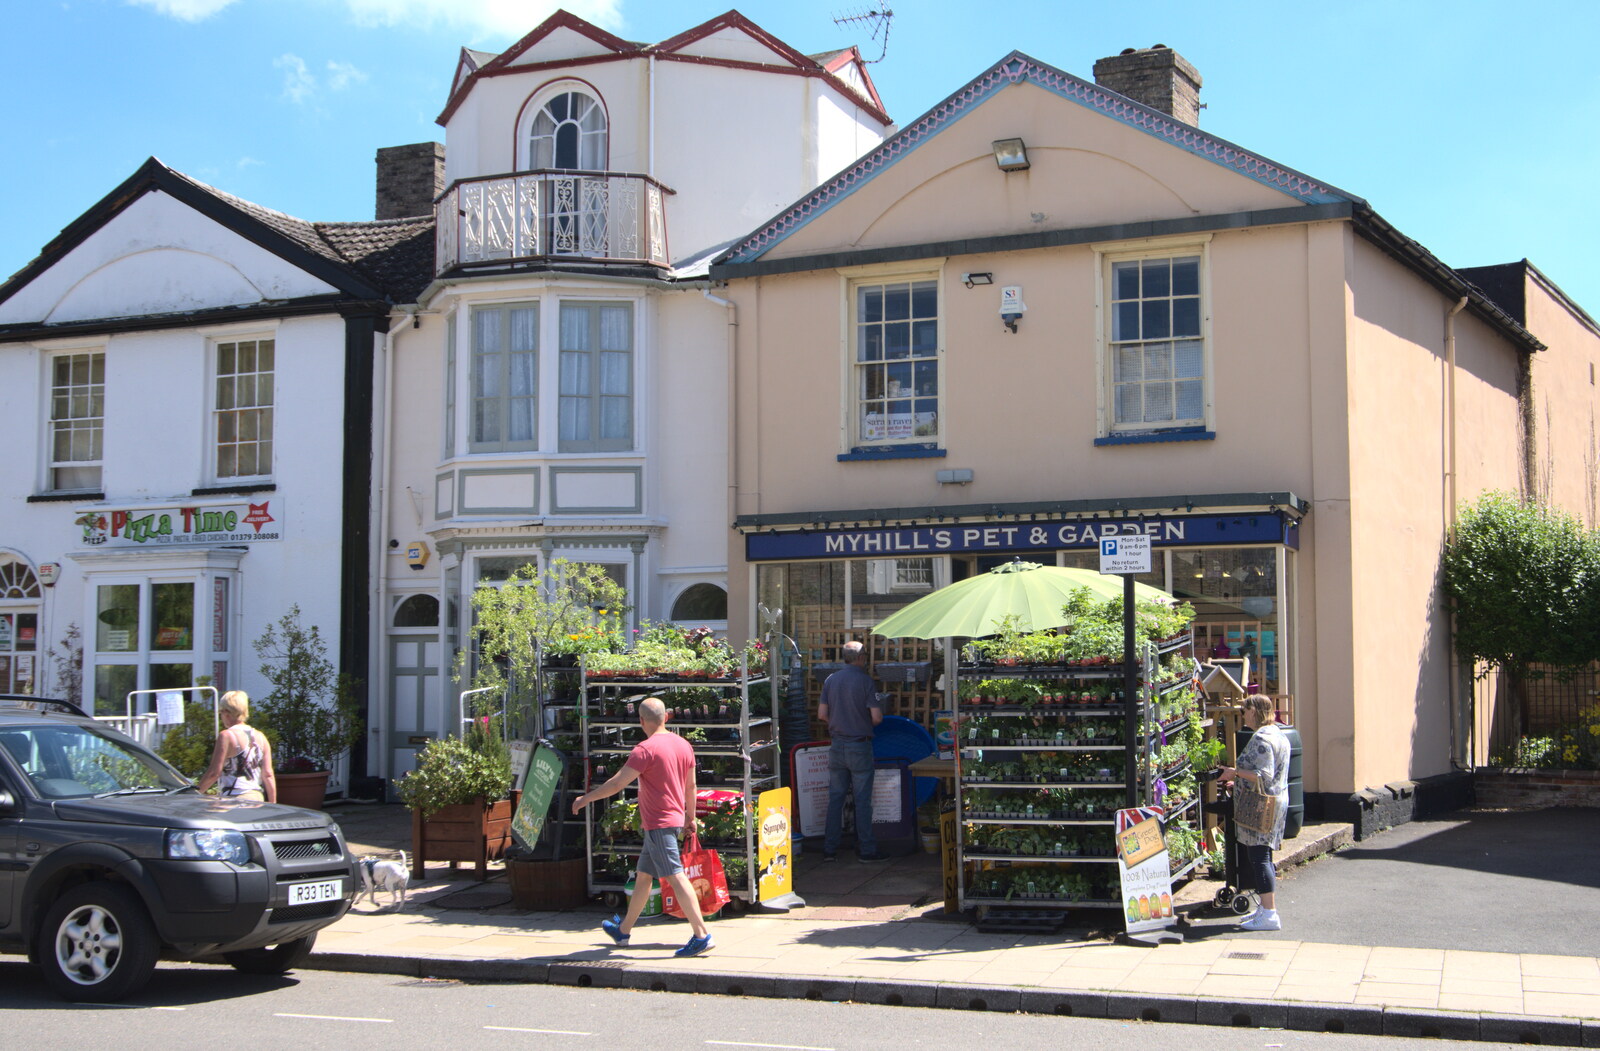 Myhill's Pet and Garden on Mere Street from A Return to Southwold, Suffolk - 14th June 2020